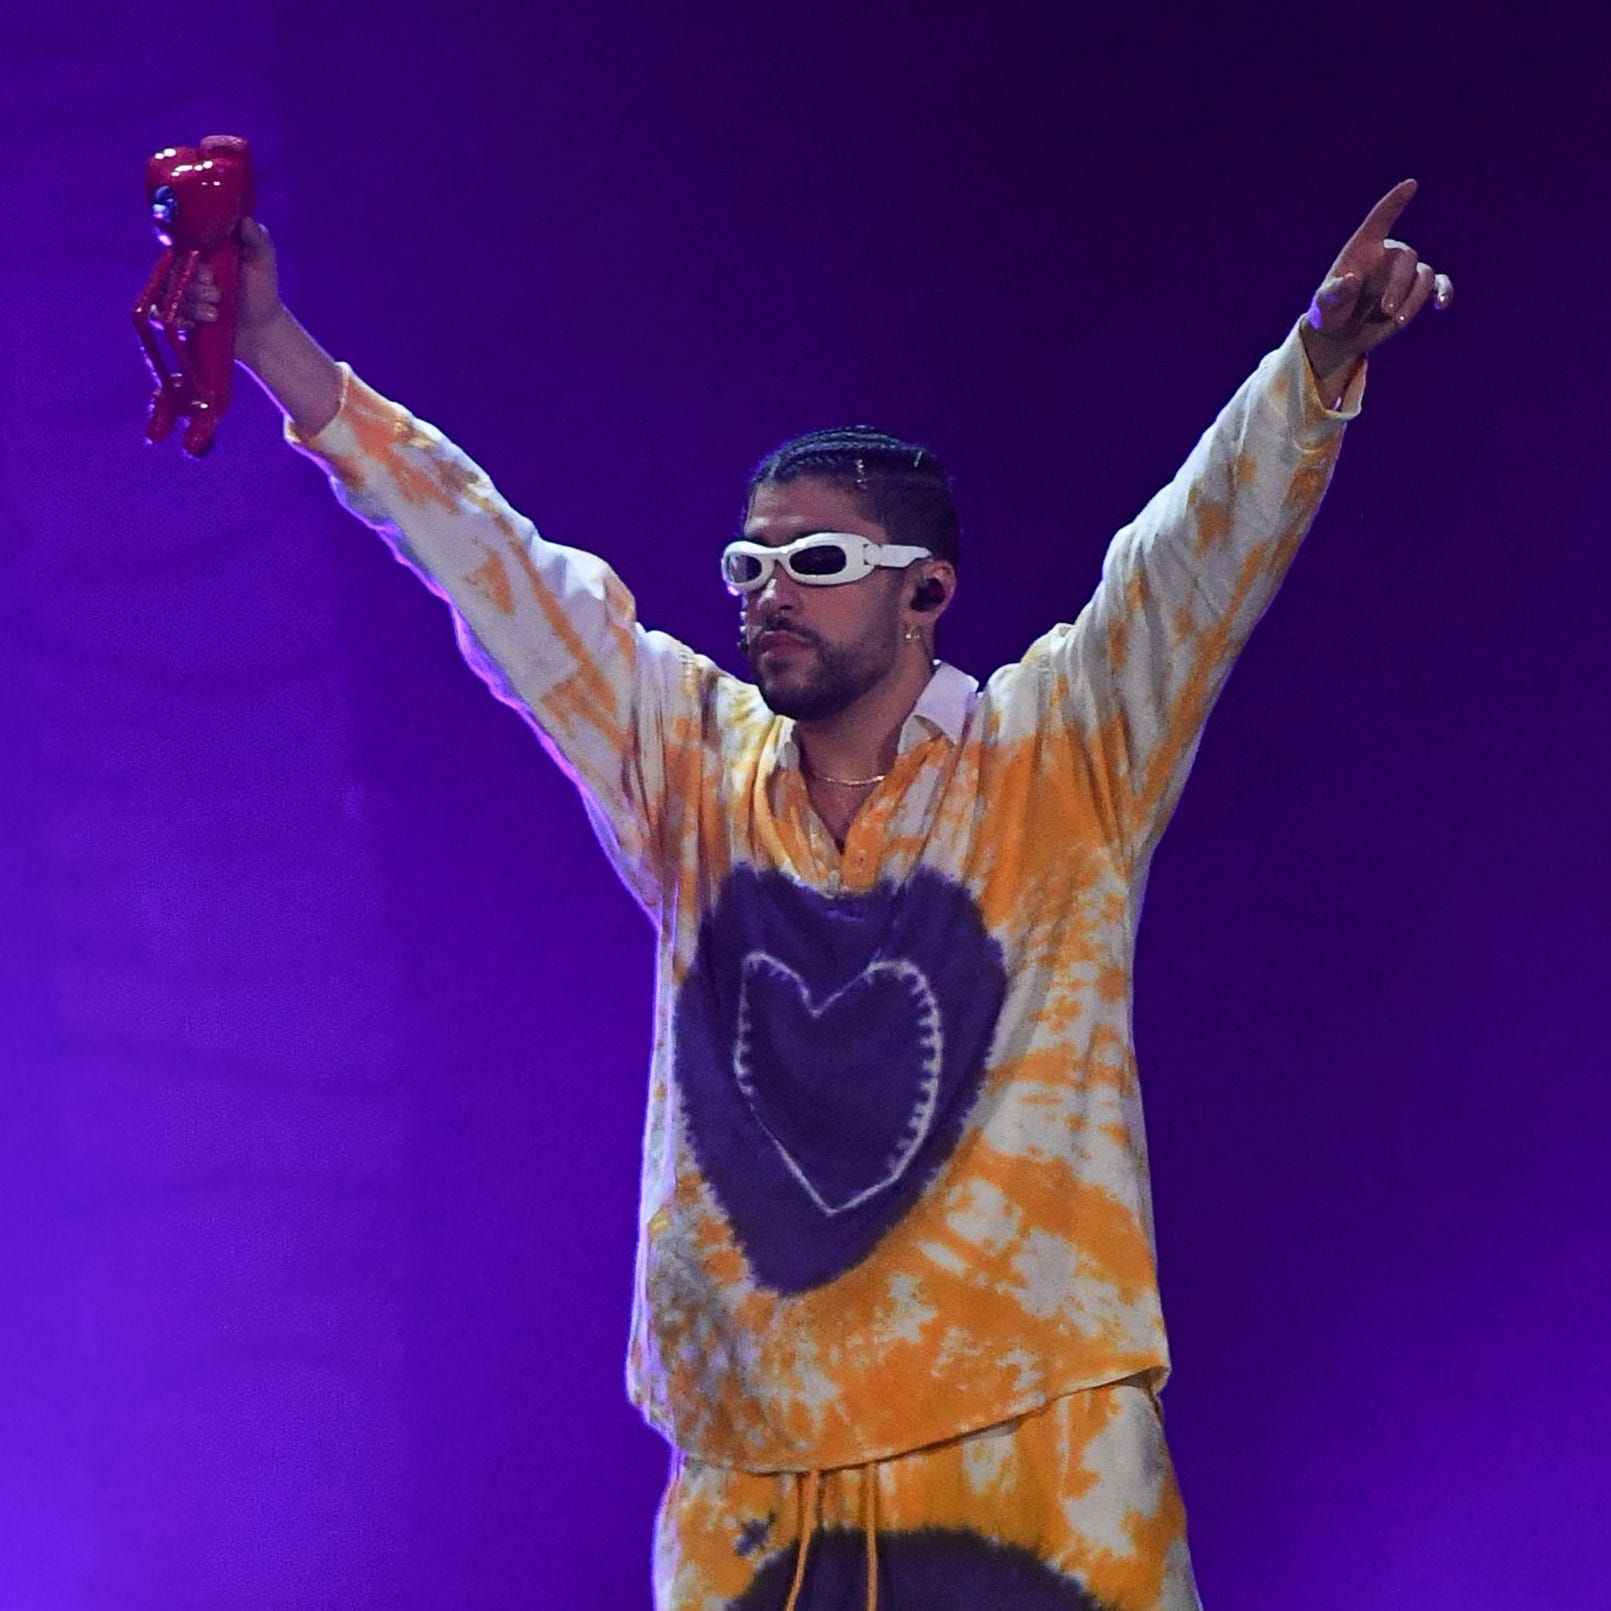 Puerto Rican singer Bad Bunny performs during "The World's Hottest Tour" at Sofi stadium in Inglewood, California, September 30, 2022. (Photo by VALERIE MACON / AFP) (Photo by VALERIE MACON/AFP via Getty Images) ORIG FILE ID: AFP_32KG6LG.jpg